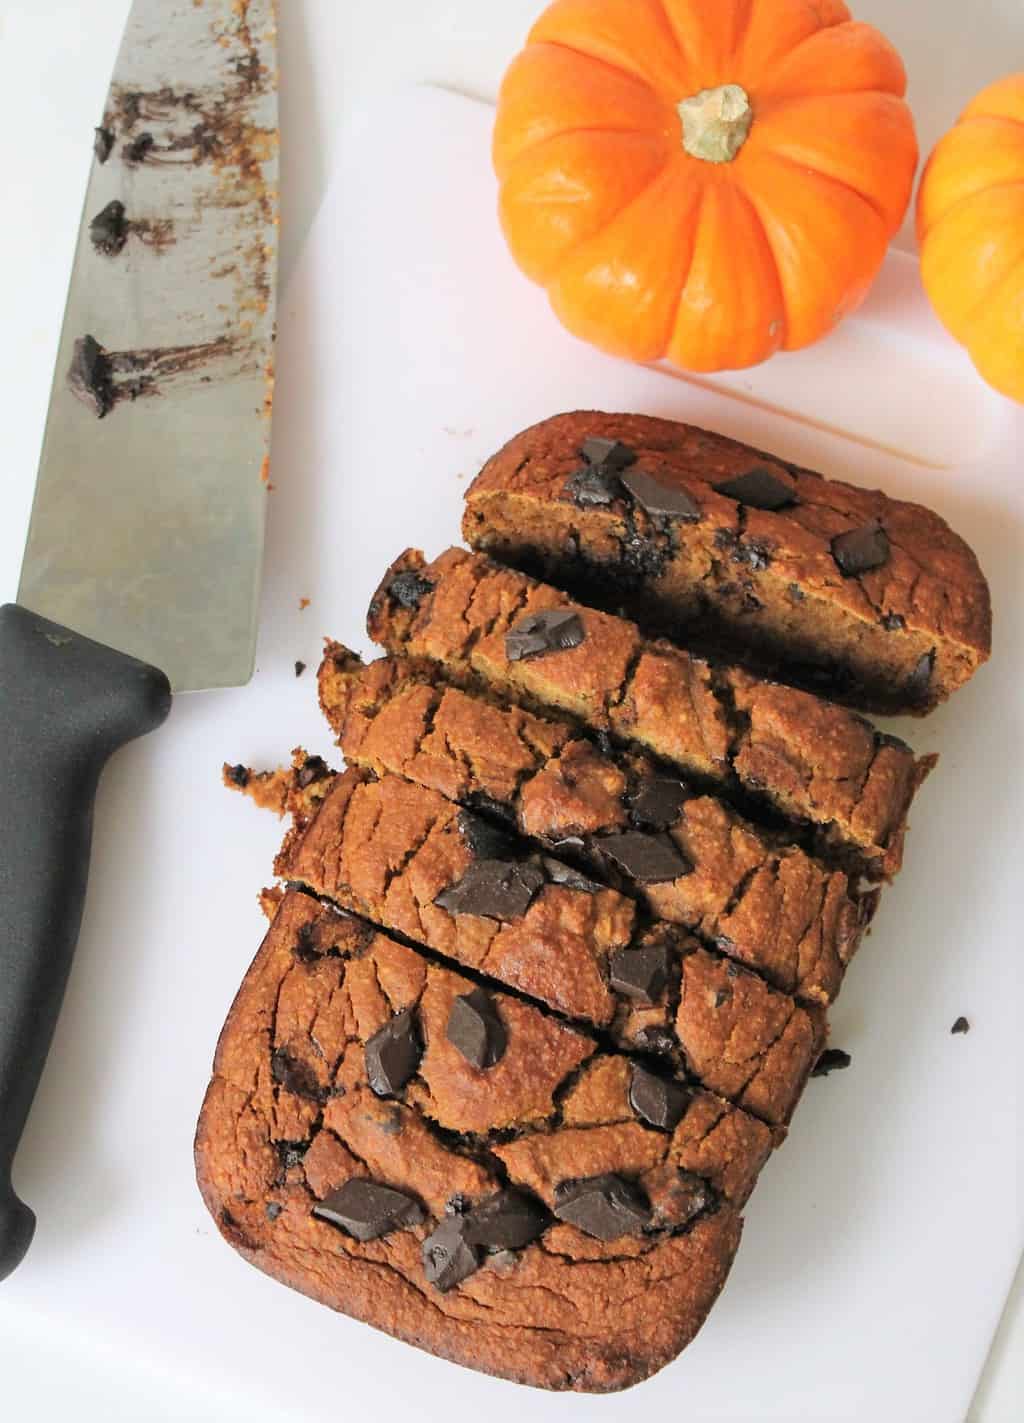 Healthy Pumpkin Banana Bread you can make with just 5 main ingredients, using a blender! No hand mixing or bowl cleaning required. Gluten Free & Vegan Option!